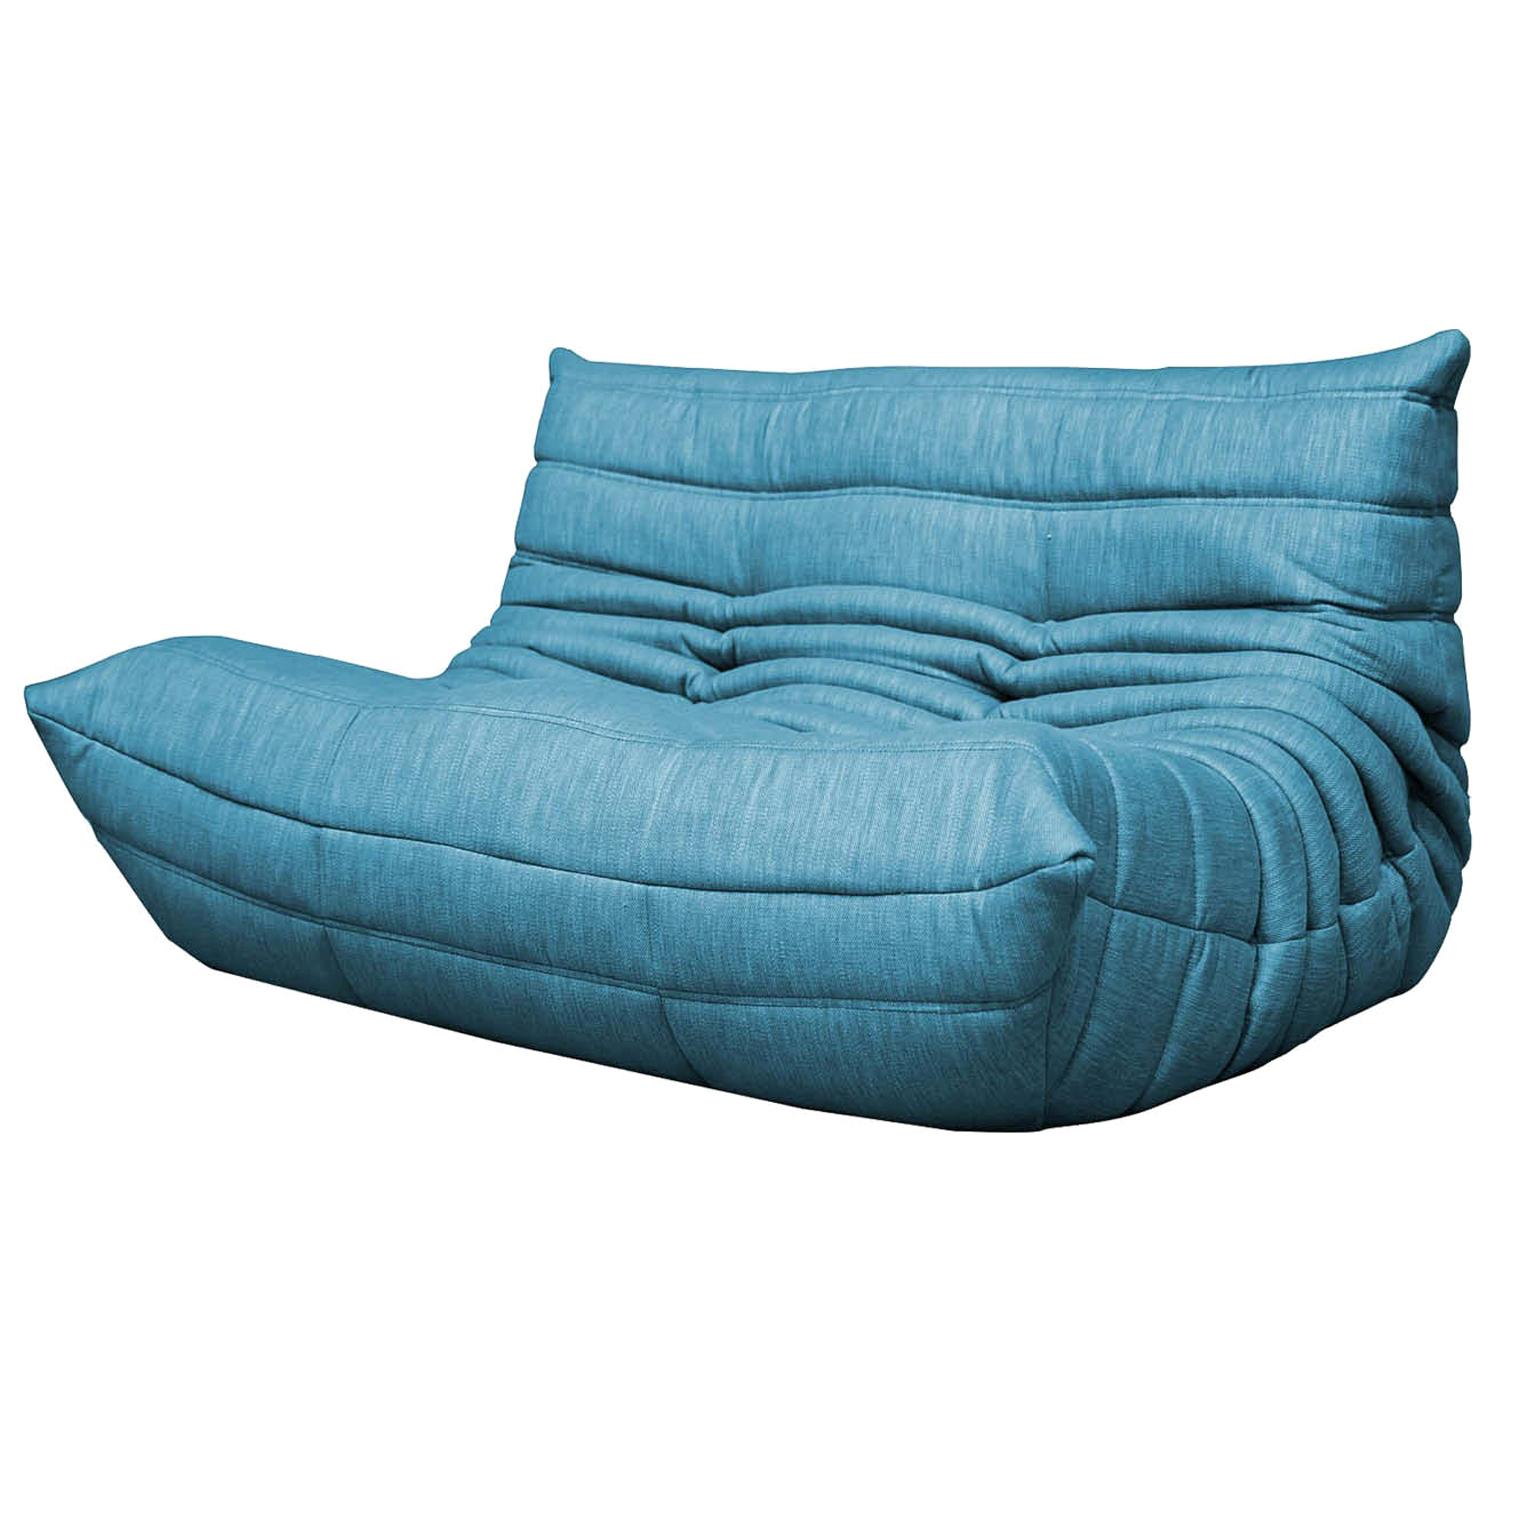 CERTIFIED Ligne Roset TOGO Loveseat in our Durable Hydro Fabric, DIAMOND QUALITY For Sale